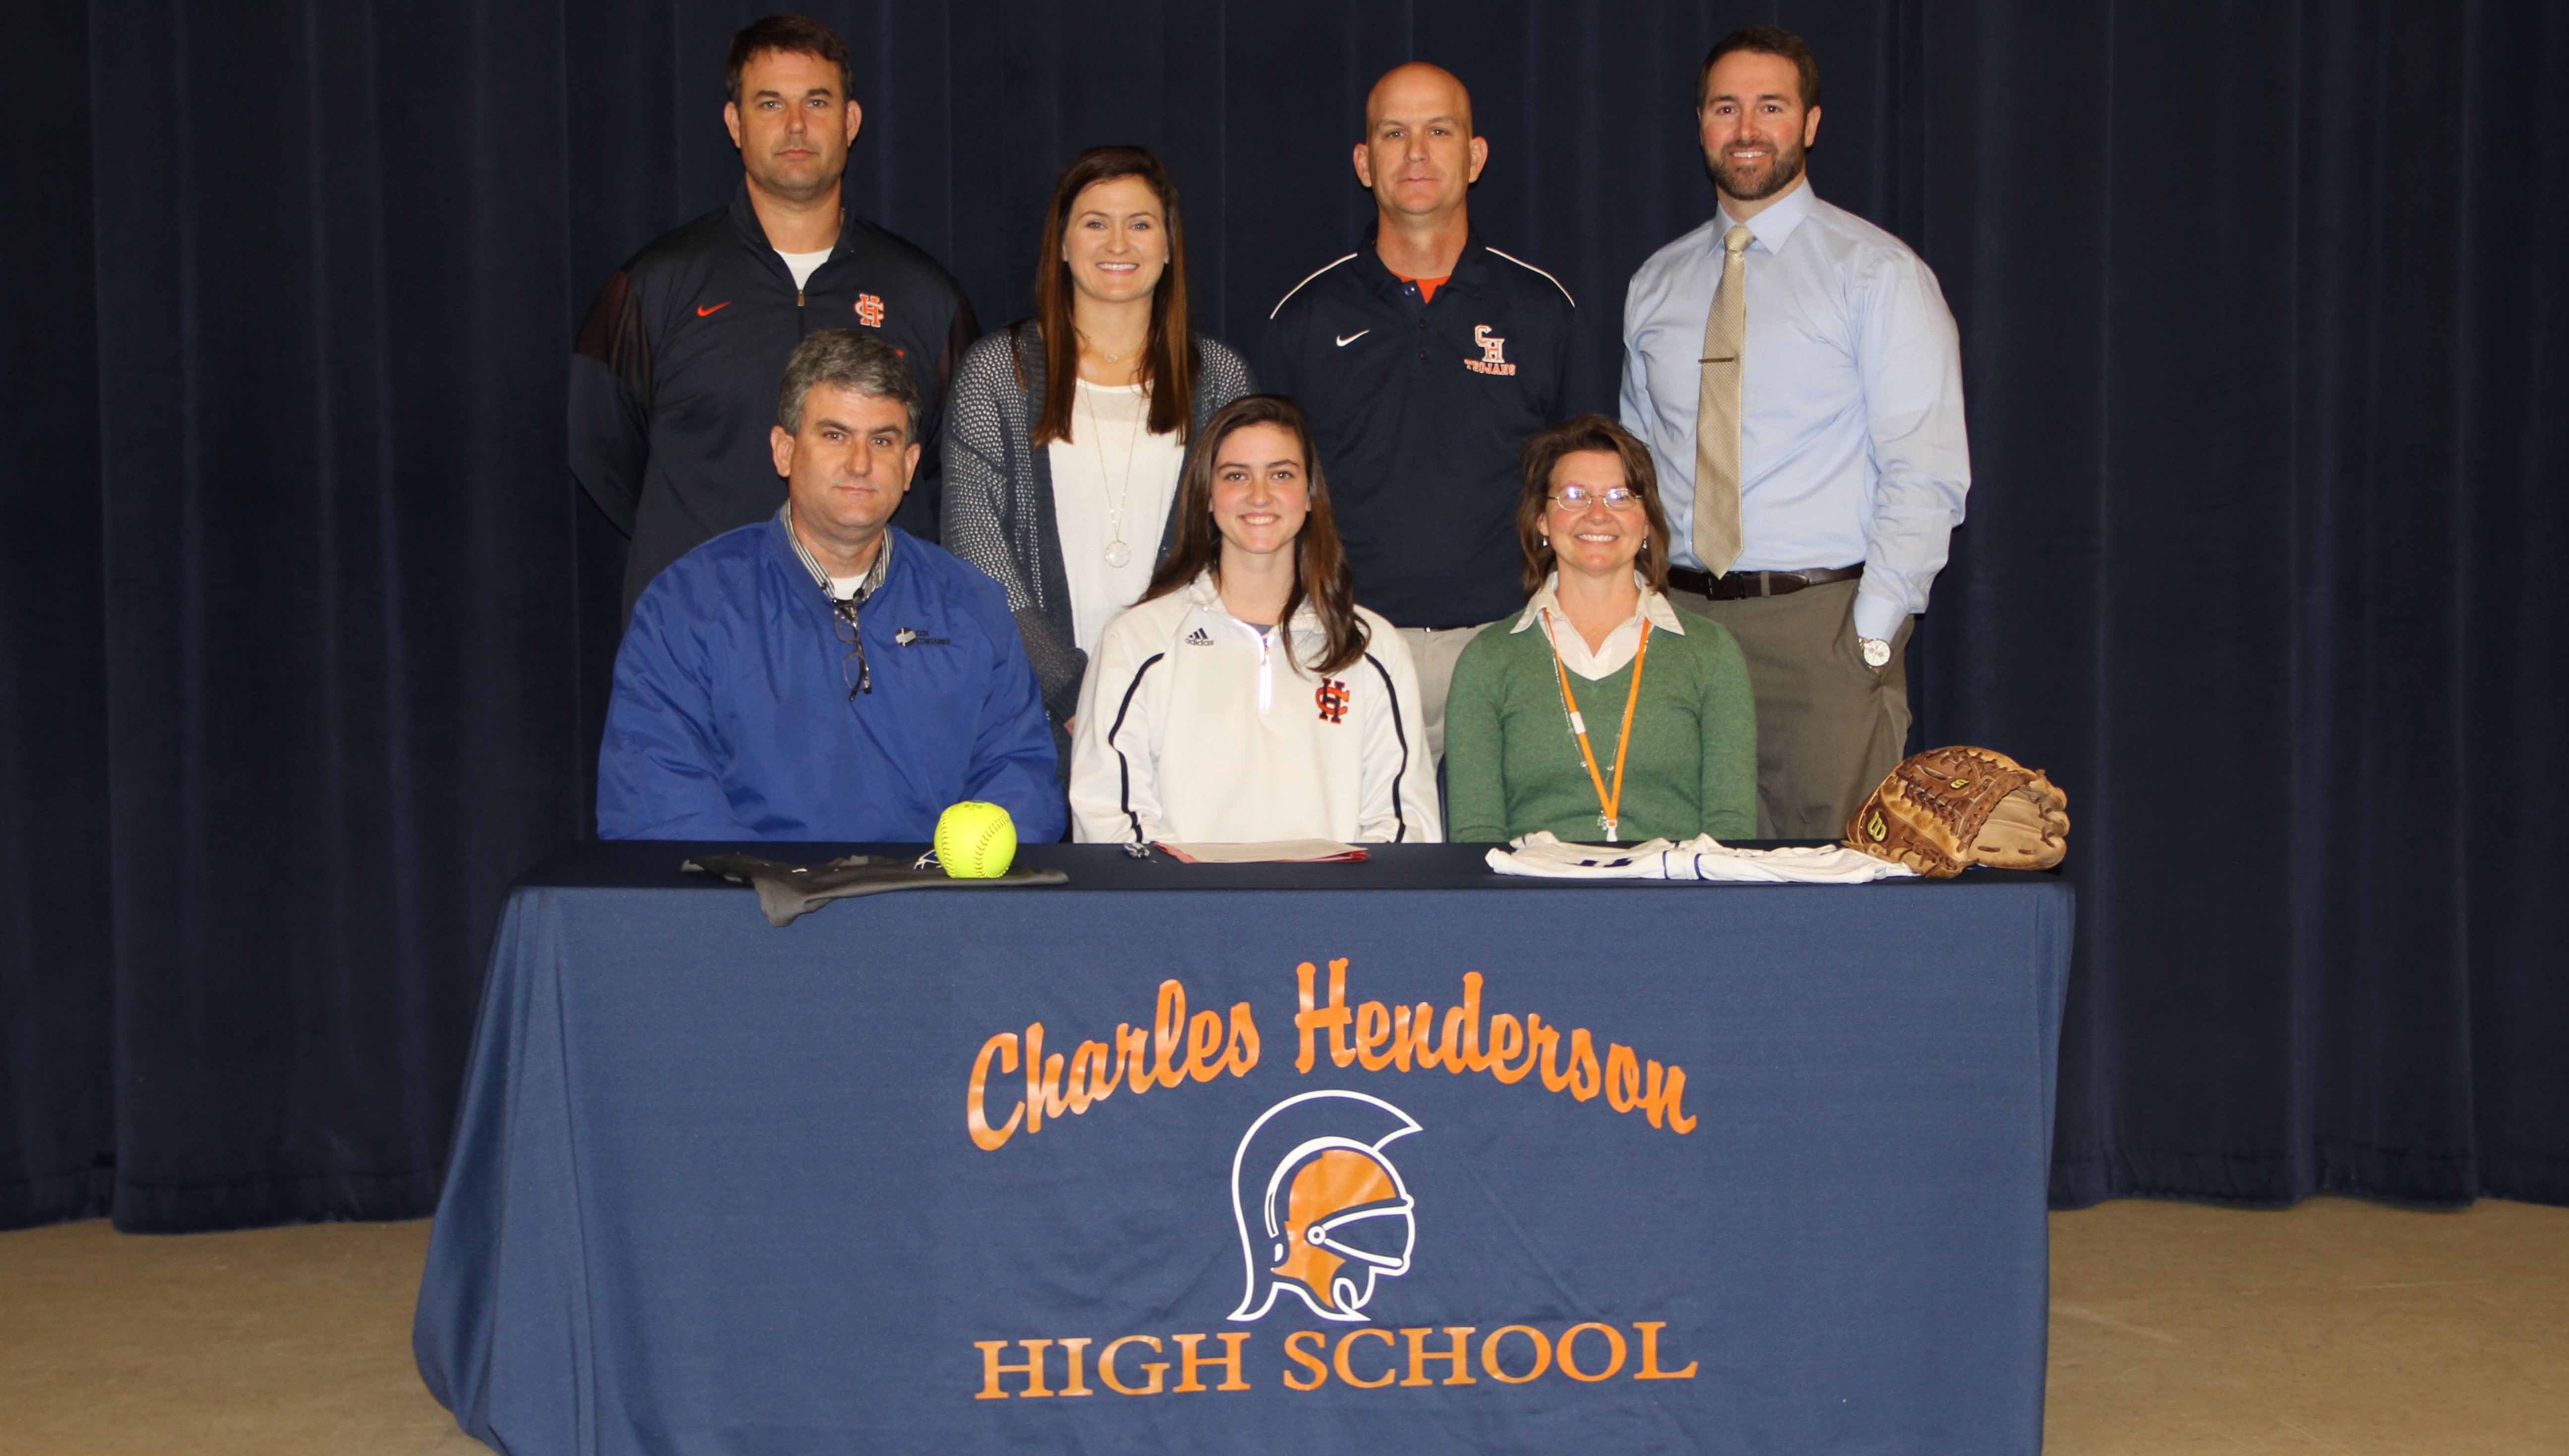 Photo/Dan Smith Charles Henderson sotball player Lindsey Fox signed with LBW-Andalusia on Thursday morning. Pictured front row, left to right: Mr. Gary Fox, Lindsey Fox and Sheree Fox. Second row, CHHS Athletic Director Brad McCoy, LBW Head Softball Coach Tiffany Taylor, CHHS Head Softball Coach Robin Snyder and CHHS Principal Brock Kelly. 